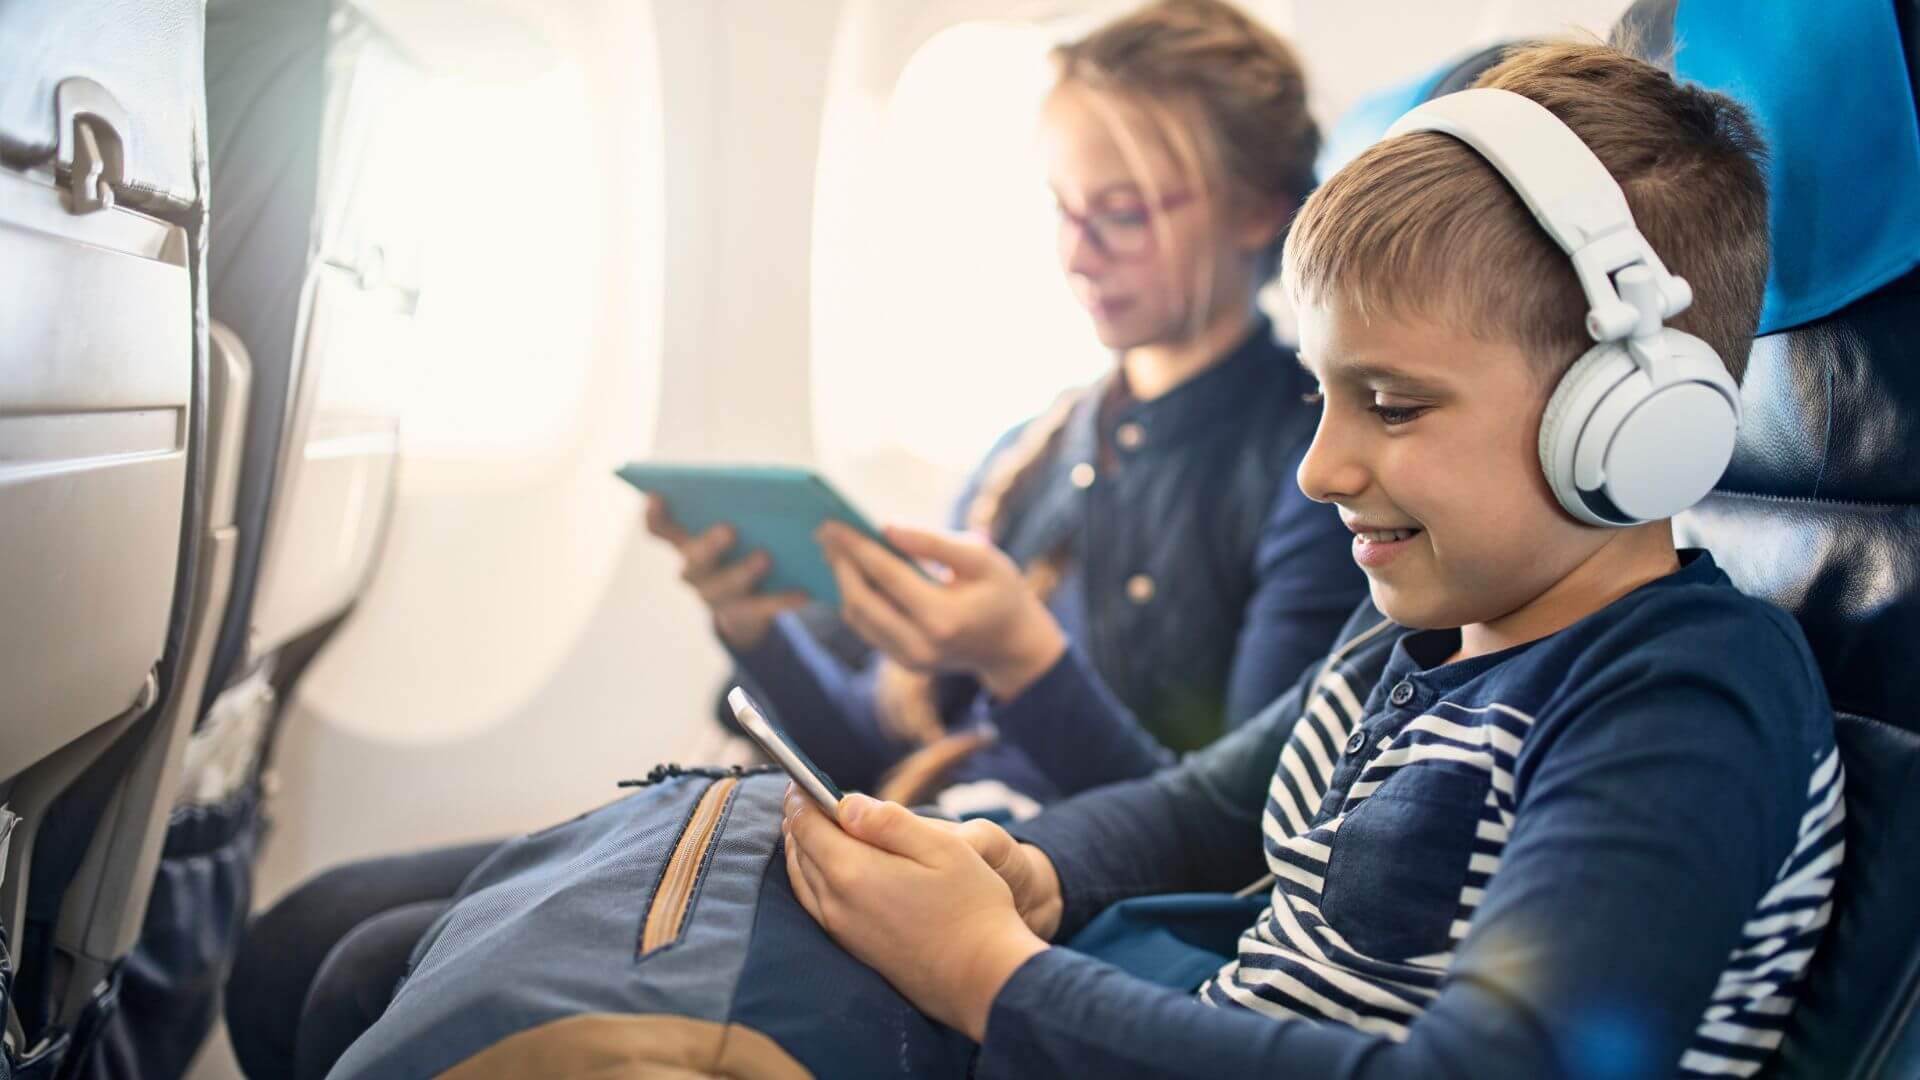 5 Tried And Tested Ways to Keep Kids Entertained on Long Flights